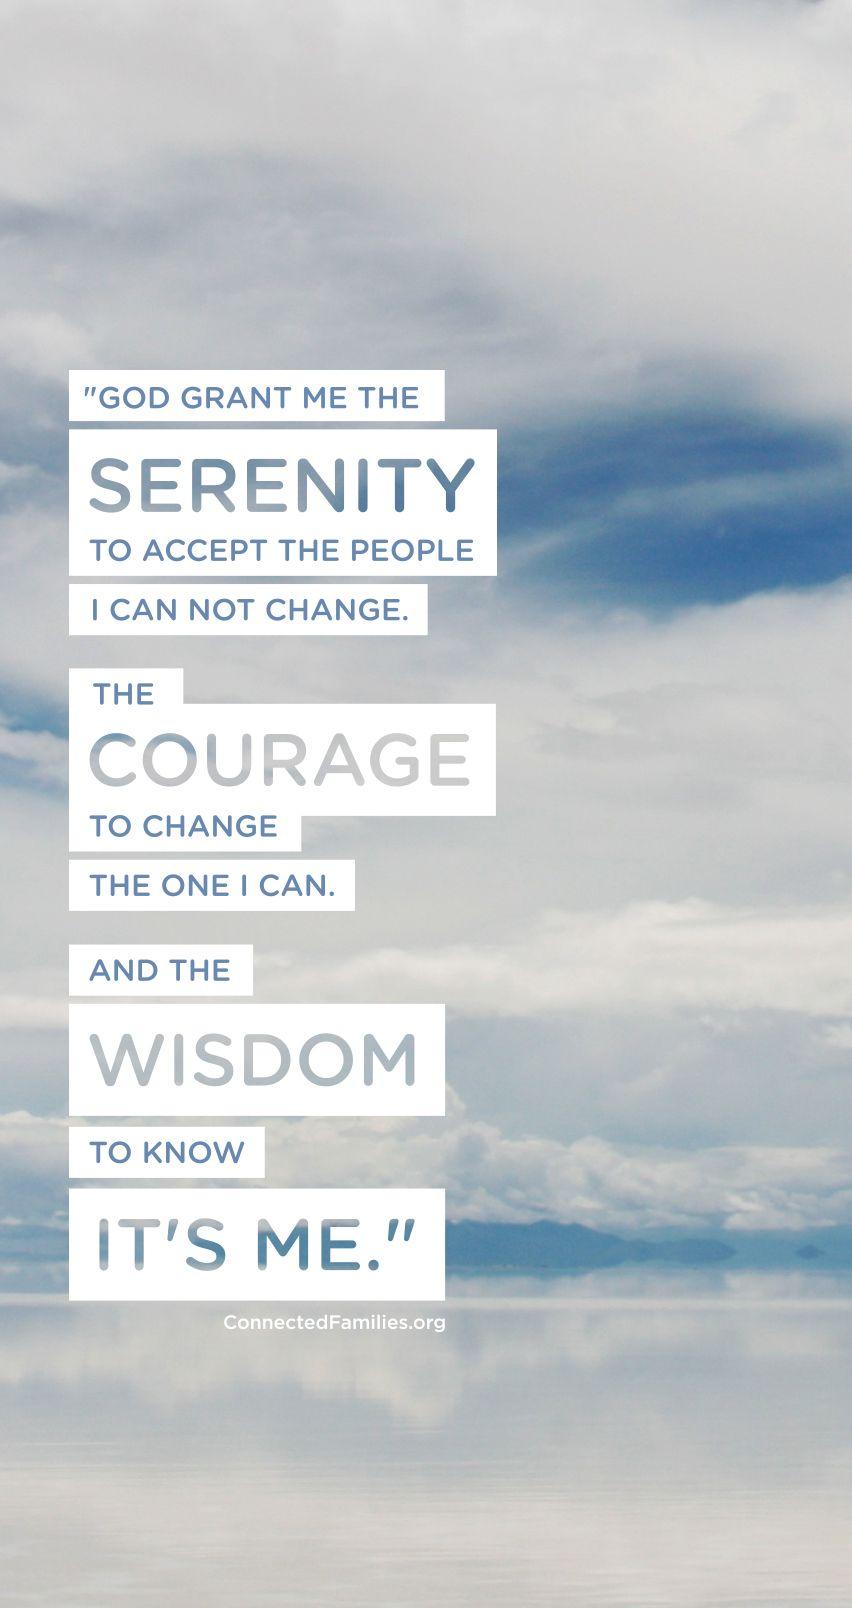 Free Serenity Prayer Downloads from Connected Families